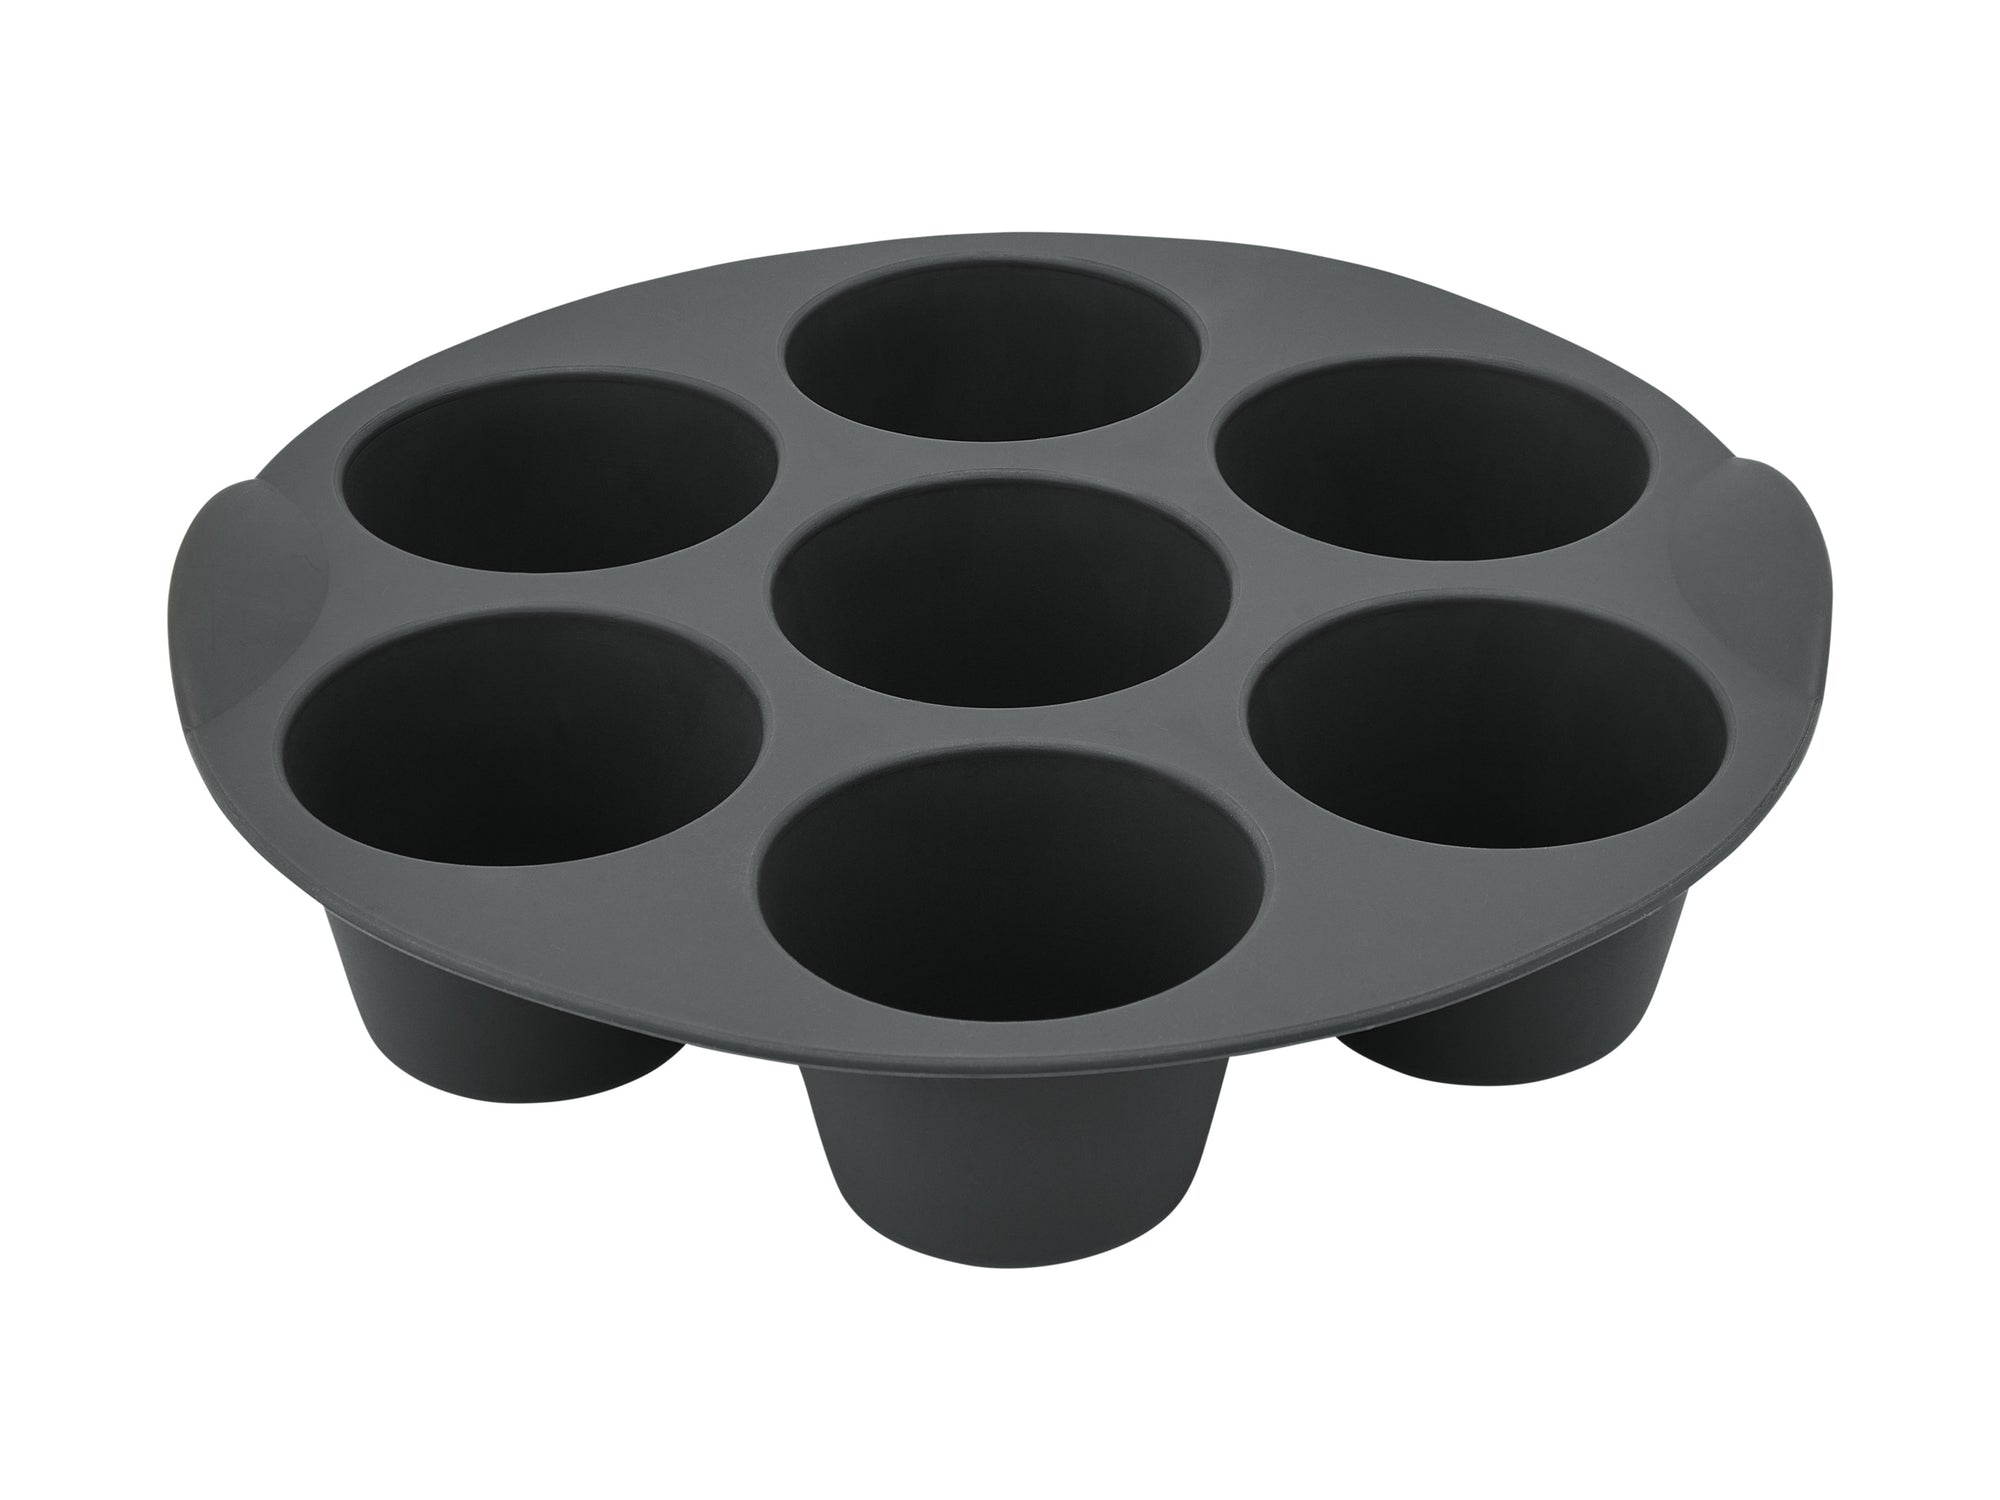 BakerMaker AirFry Cupcake Mould